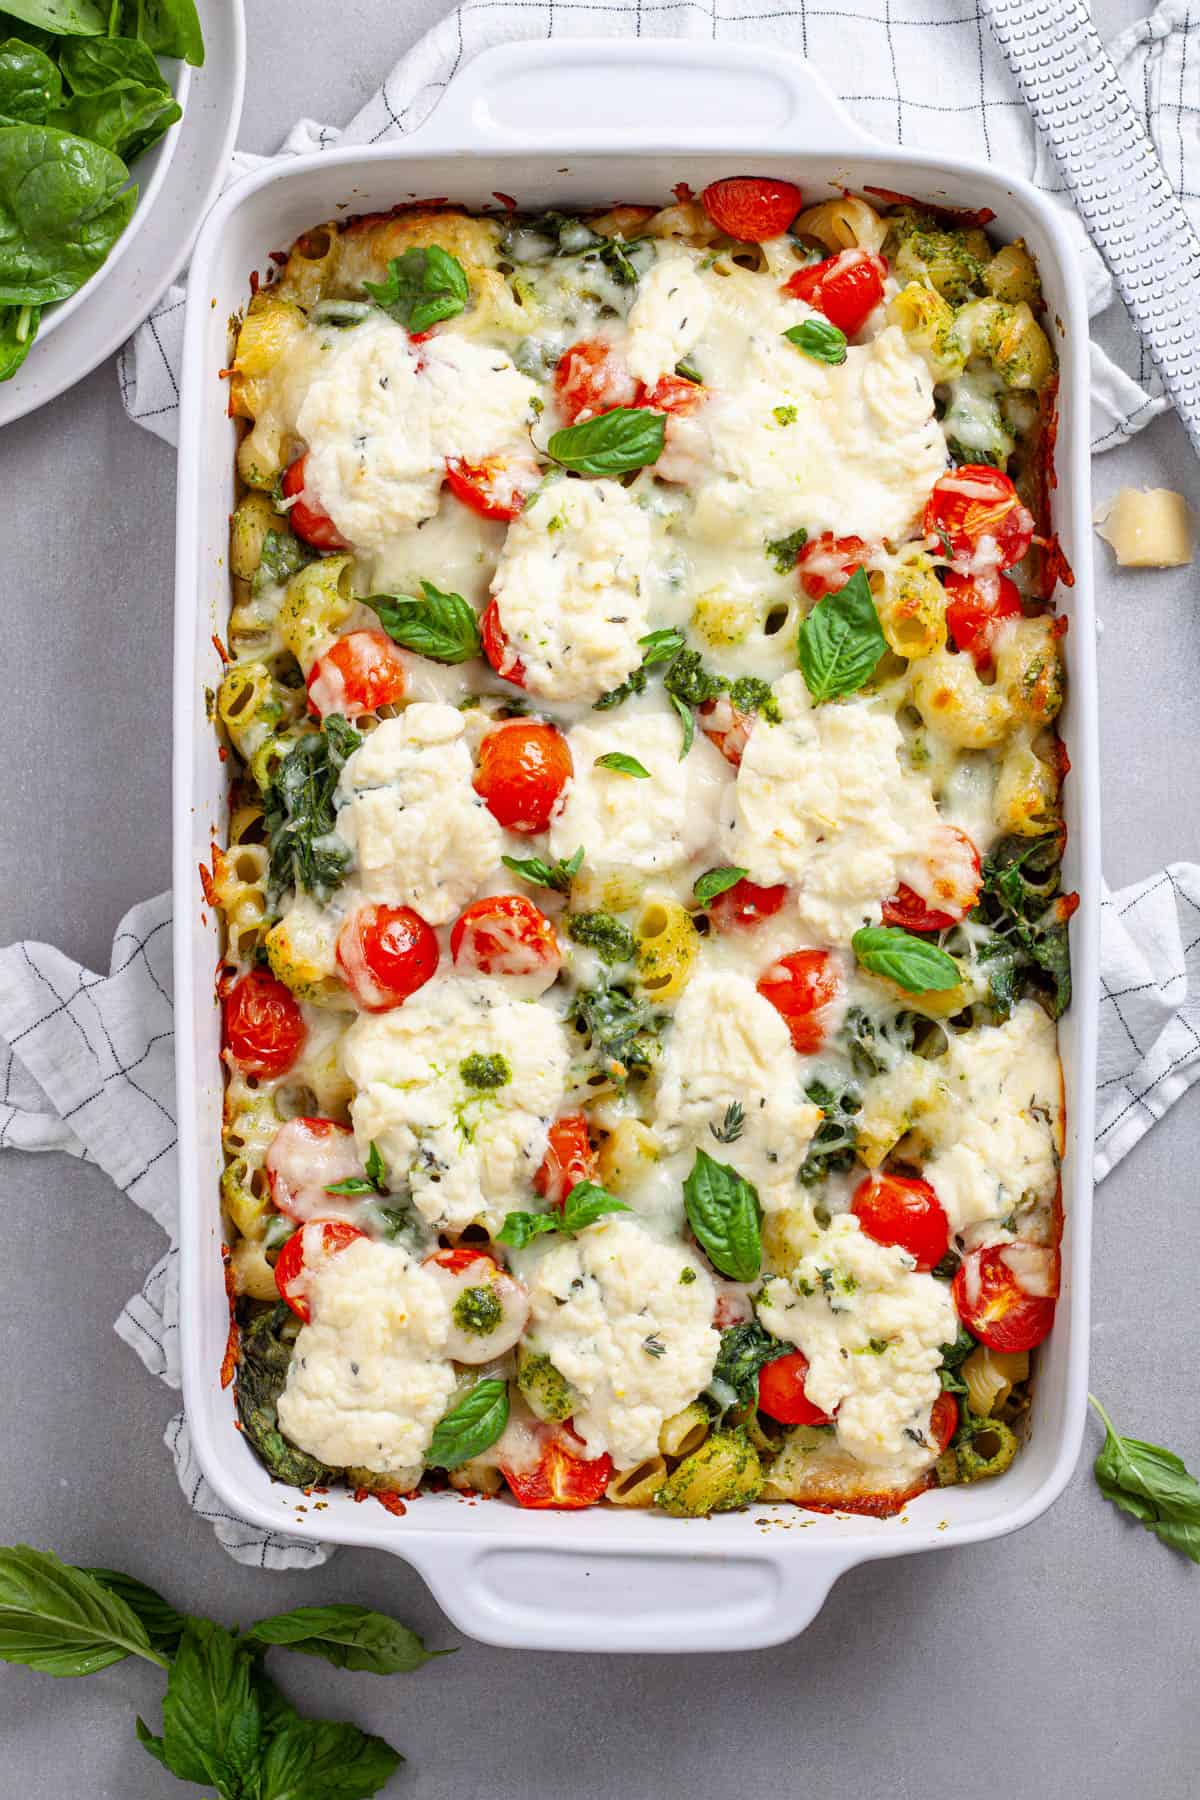 A casserole dish of ricotta pesto pasta with tomatoes and spinach on a gray table.